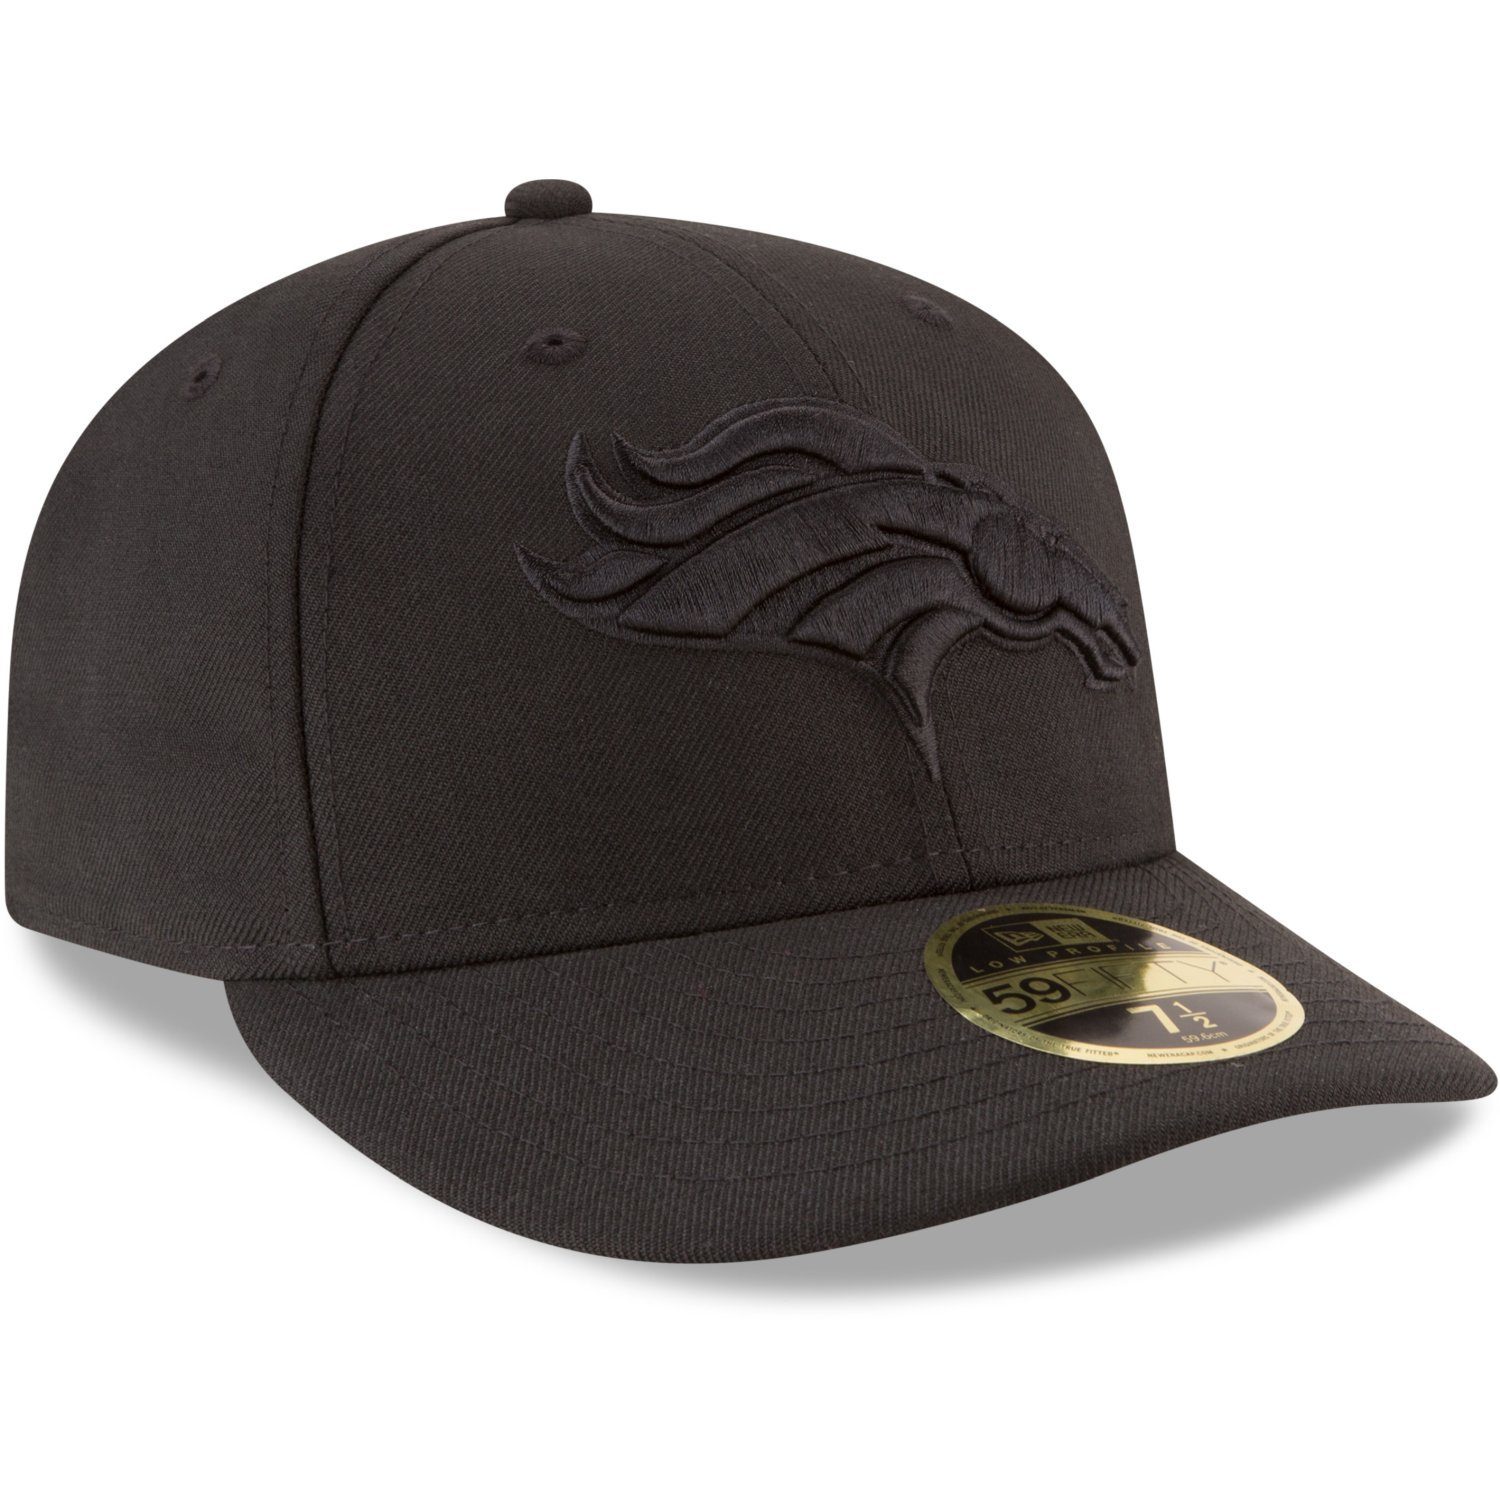 New Profile 59Fifty Low Fitted Era Teams Denver NFL Broncos Cap